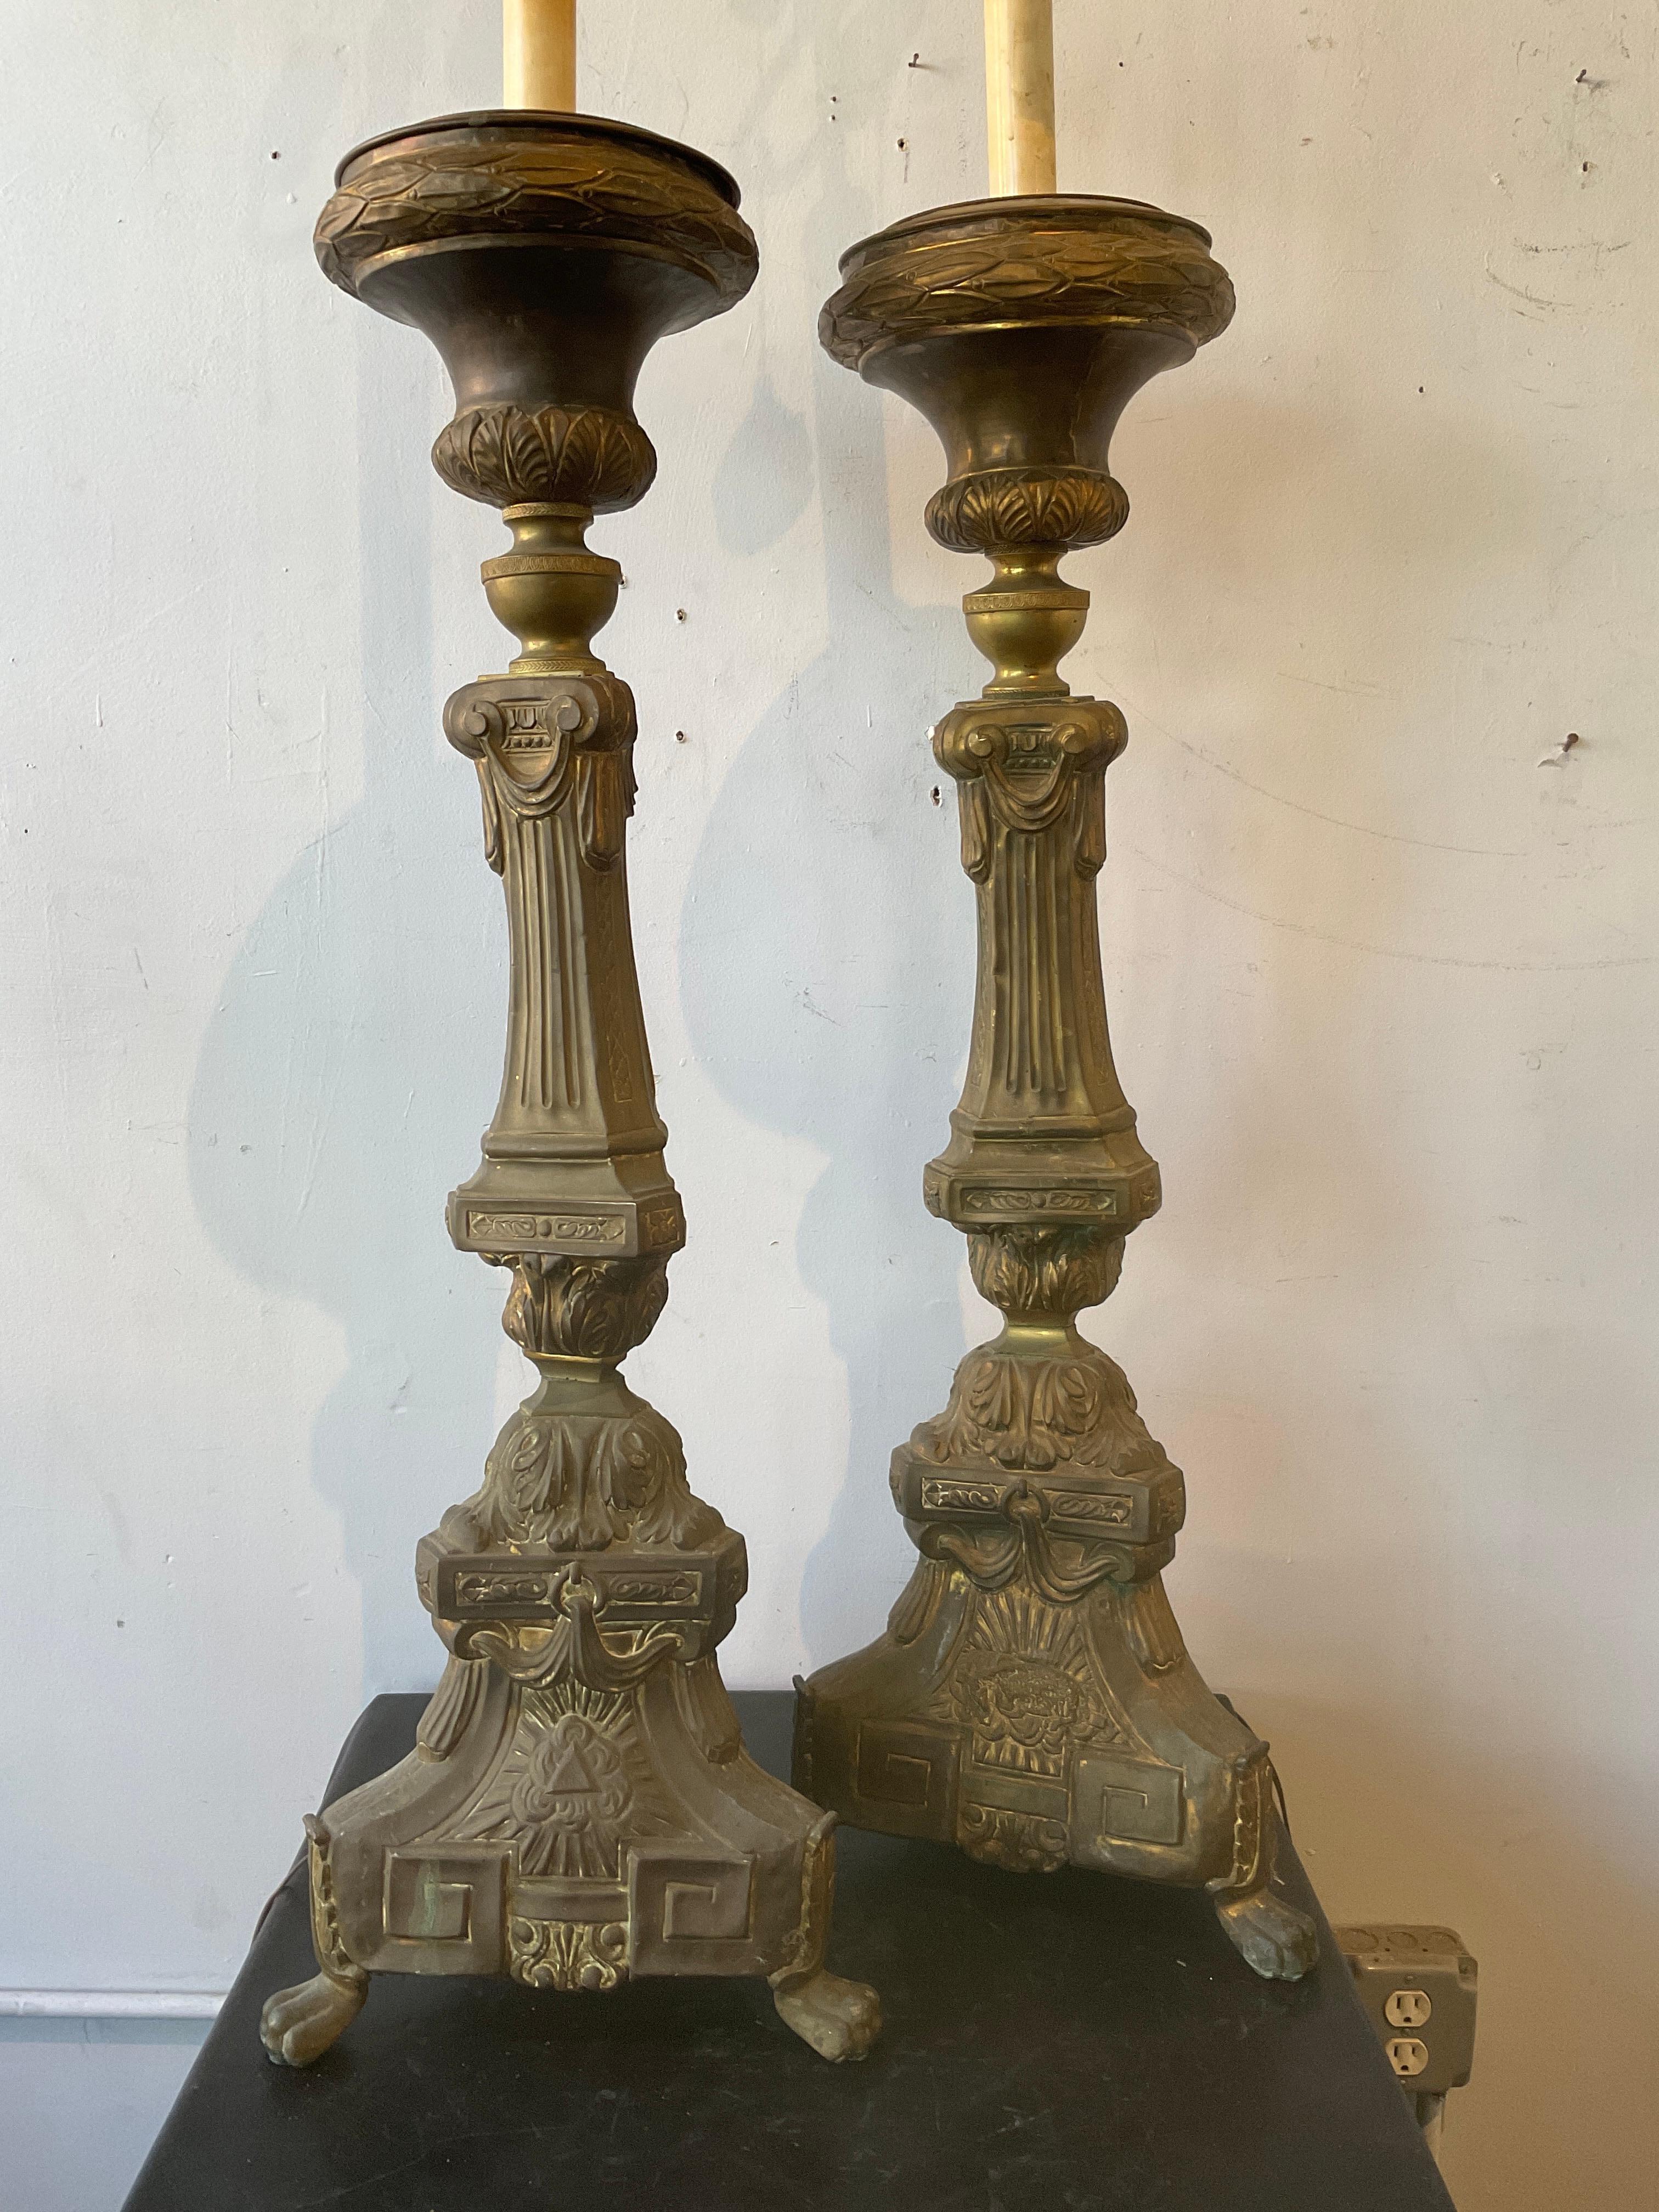 Pair of Tall 1870s Brass Church Candlestick Lamps In Good Condition For Sale In Tarrytown, NY